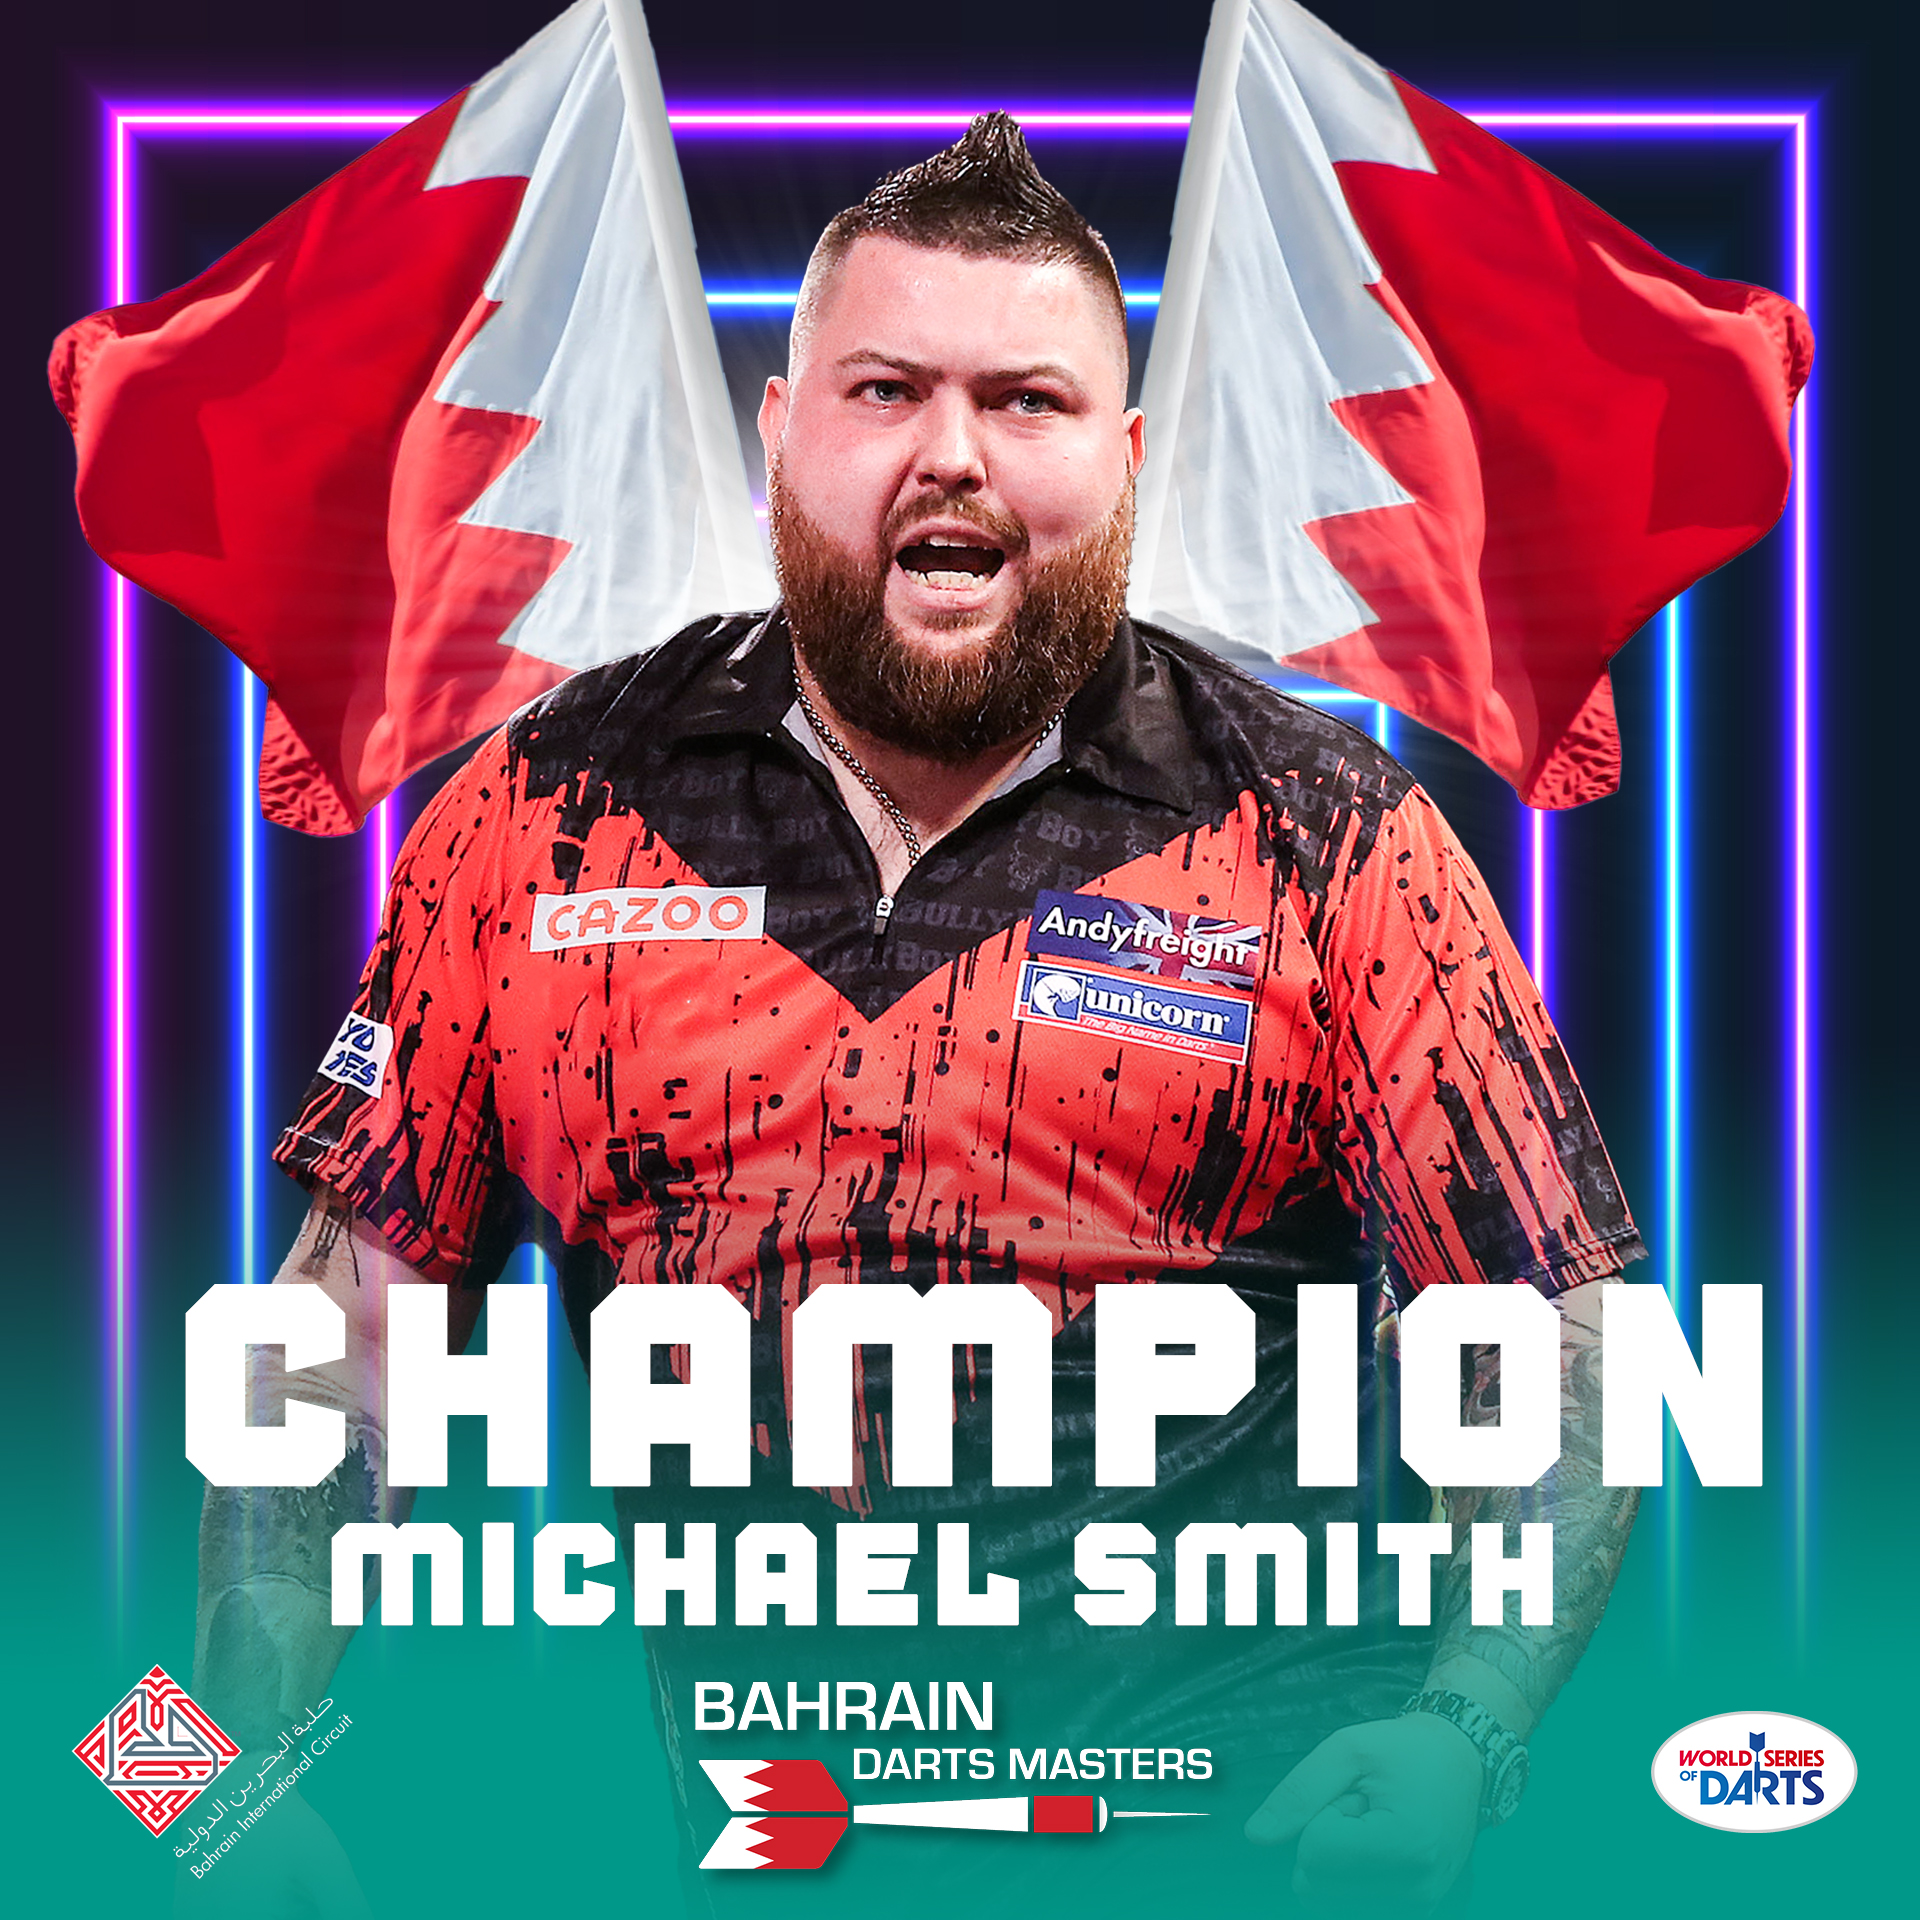 PDC on Twitter: "THE FIRST EVER BAHRAIN DARTS 🇧🇭🏆 Just ten days after his World Championship win, Michael Smith is top of the pile again as he wins the 2023